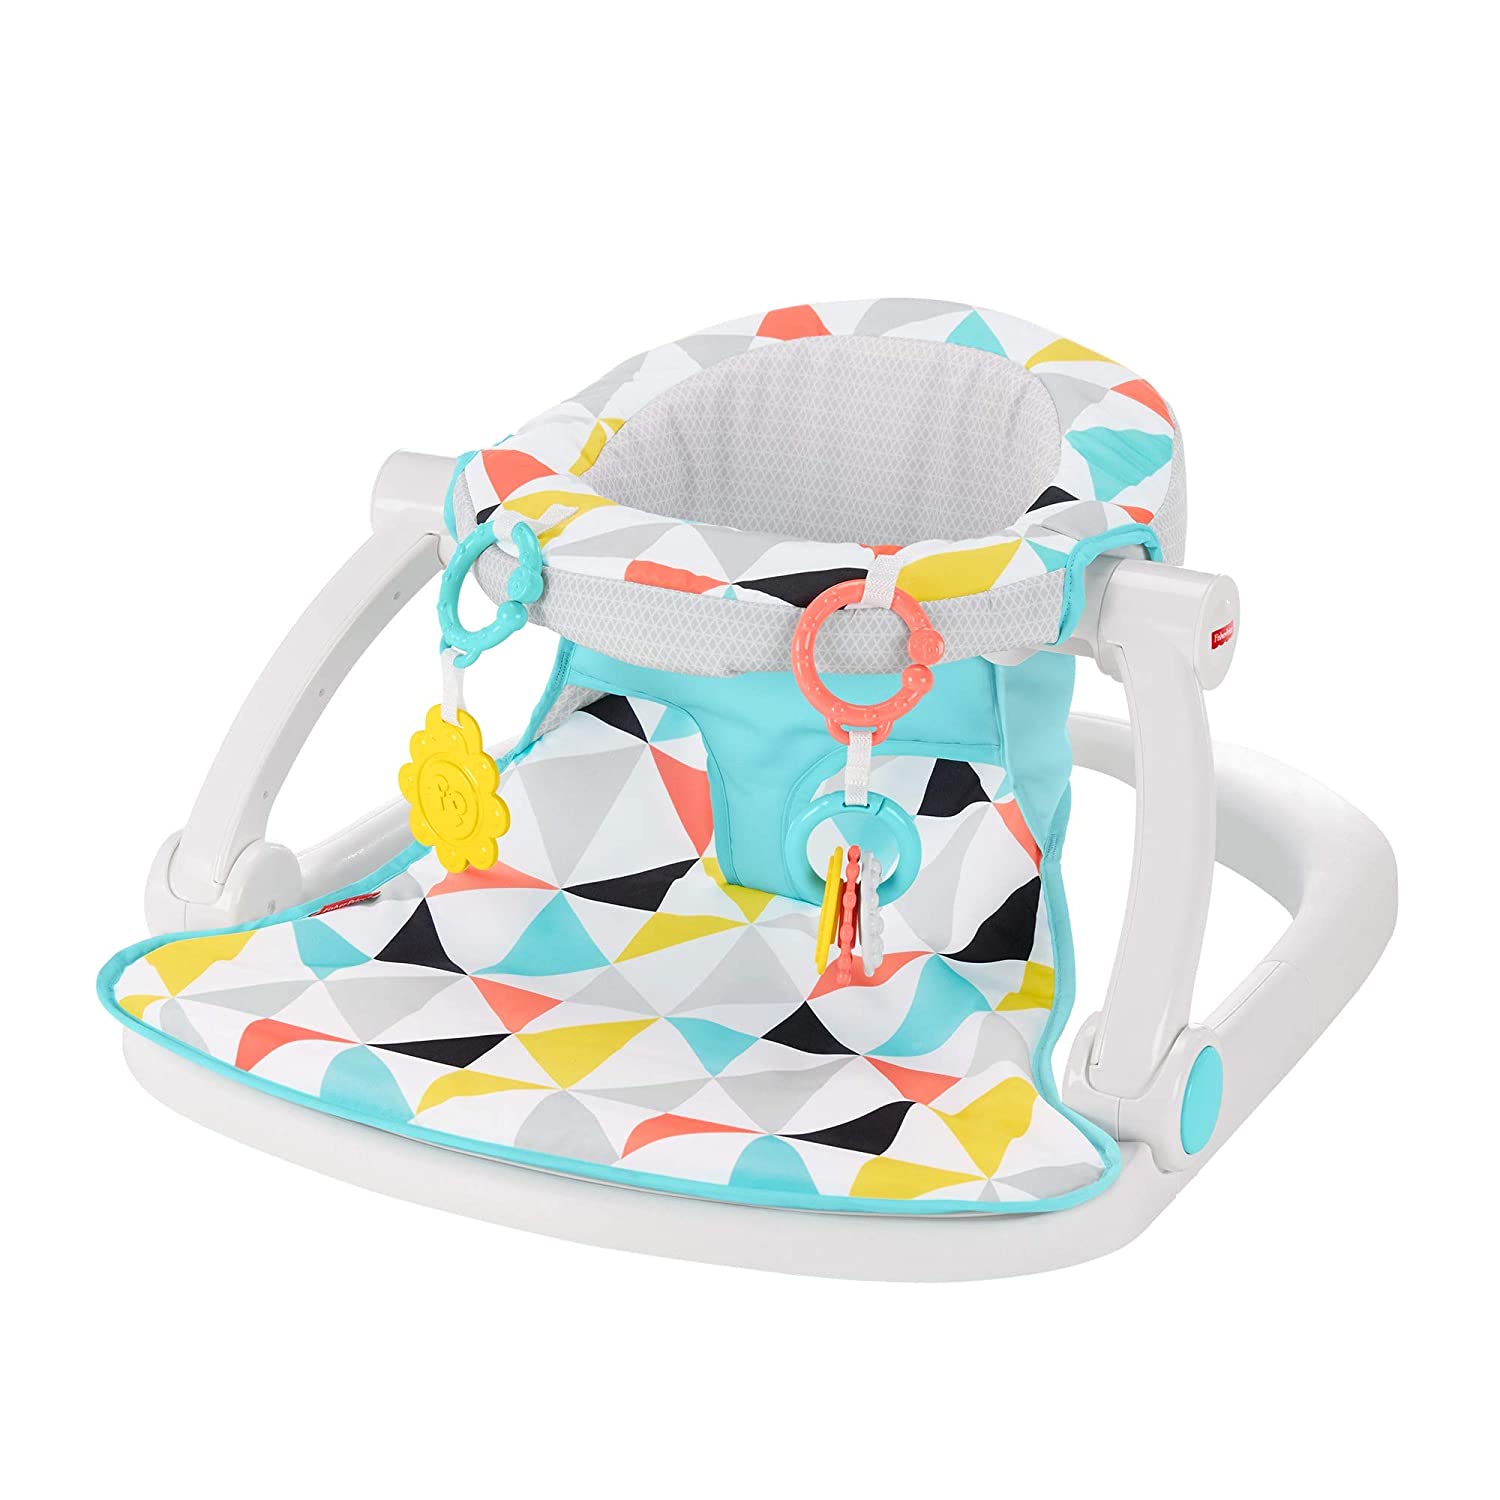 FisherPrice SitMeUp Floor Seat for Only 29.99 Shipped